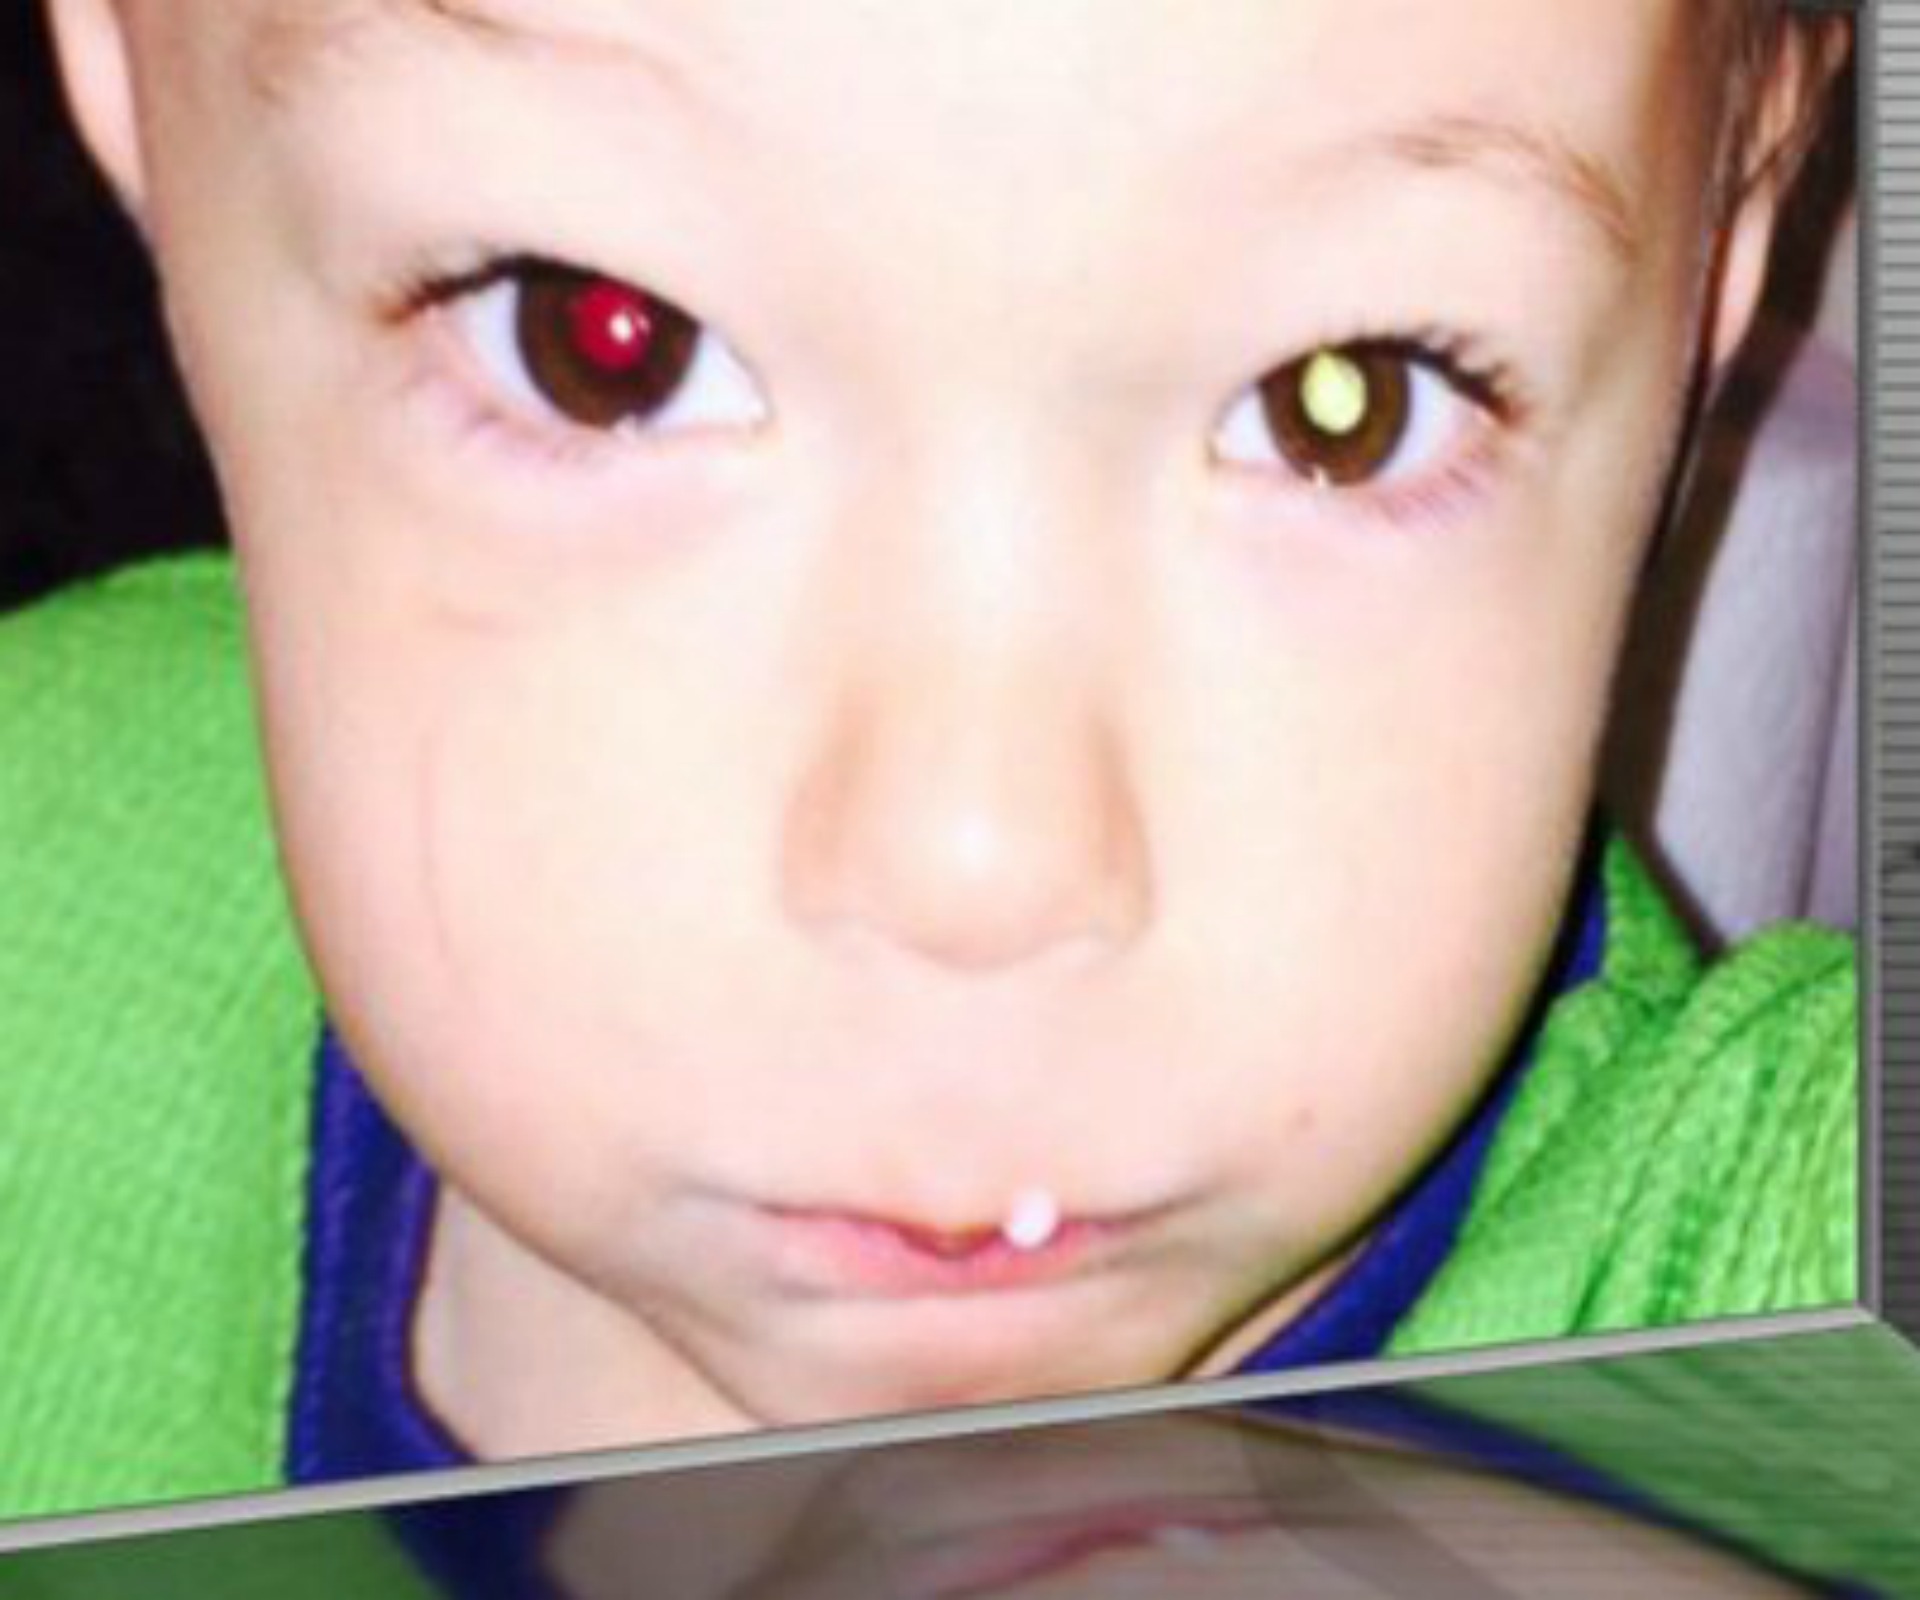 Mum catches toddler’s eye cancer in photographs